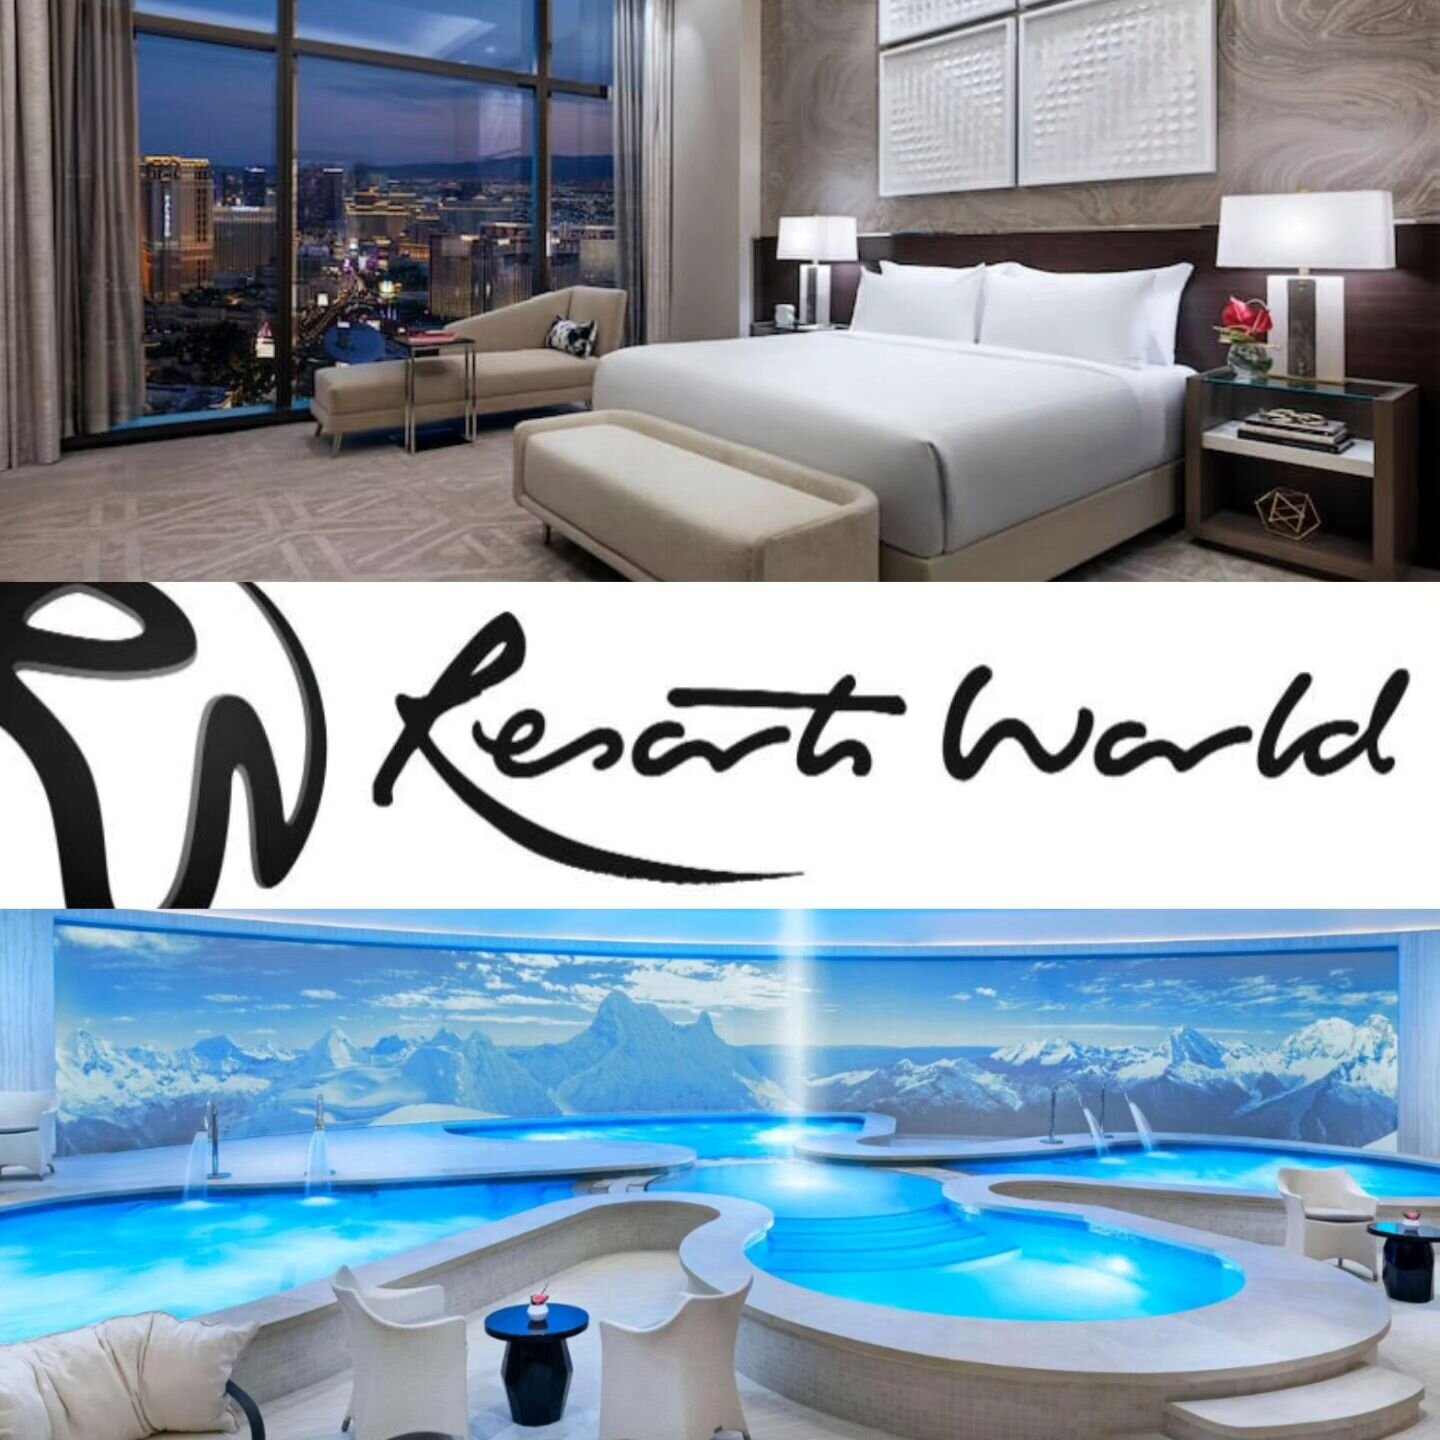 Big Shout-out to the man, @chubbspeterson_clubpro for allowing us to arrange another stay in Vegas. Hope you enjoyed the lavish resort! 

#resortsworld #lasvegas #vegas #crockfords #luxury #hotel #hotels #lasvegasstrip #booking #travel #travelphotogr